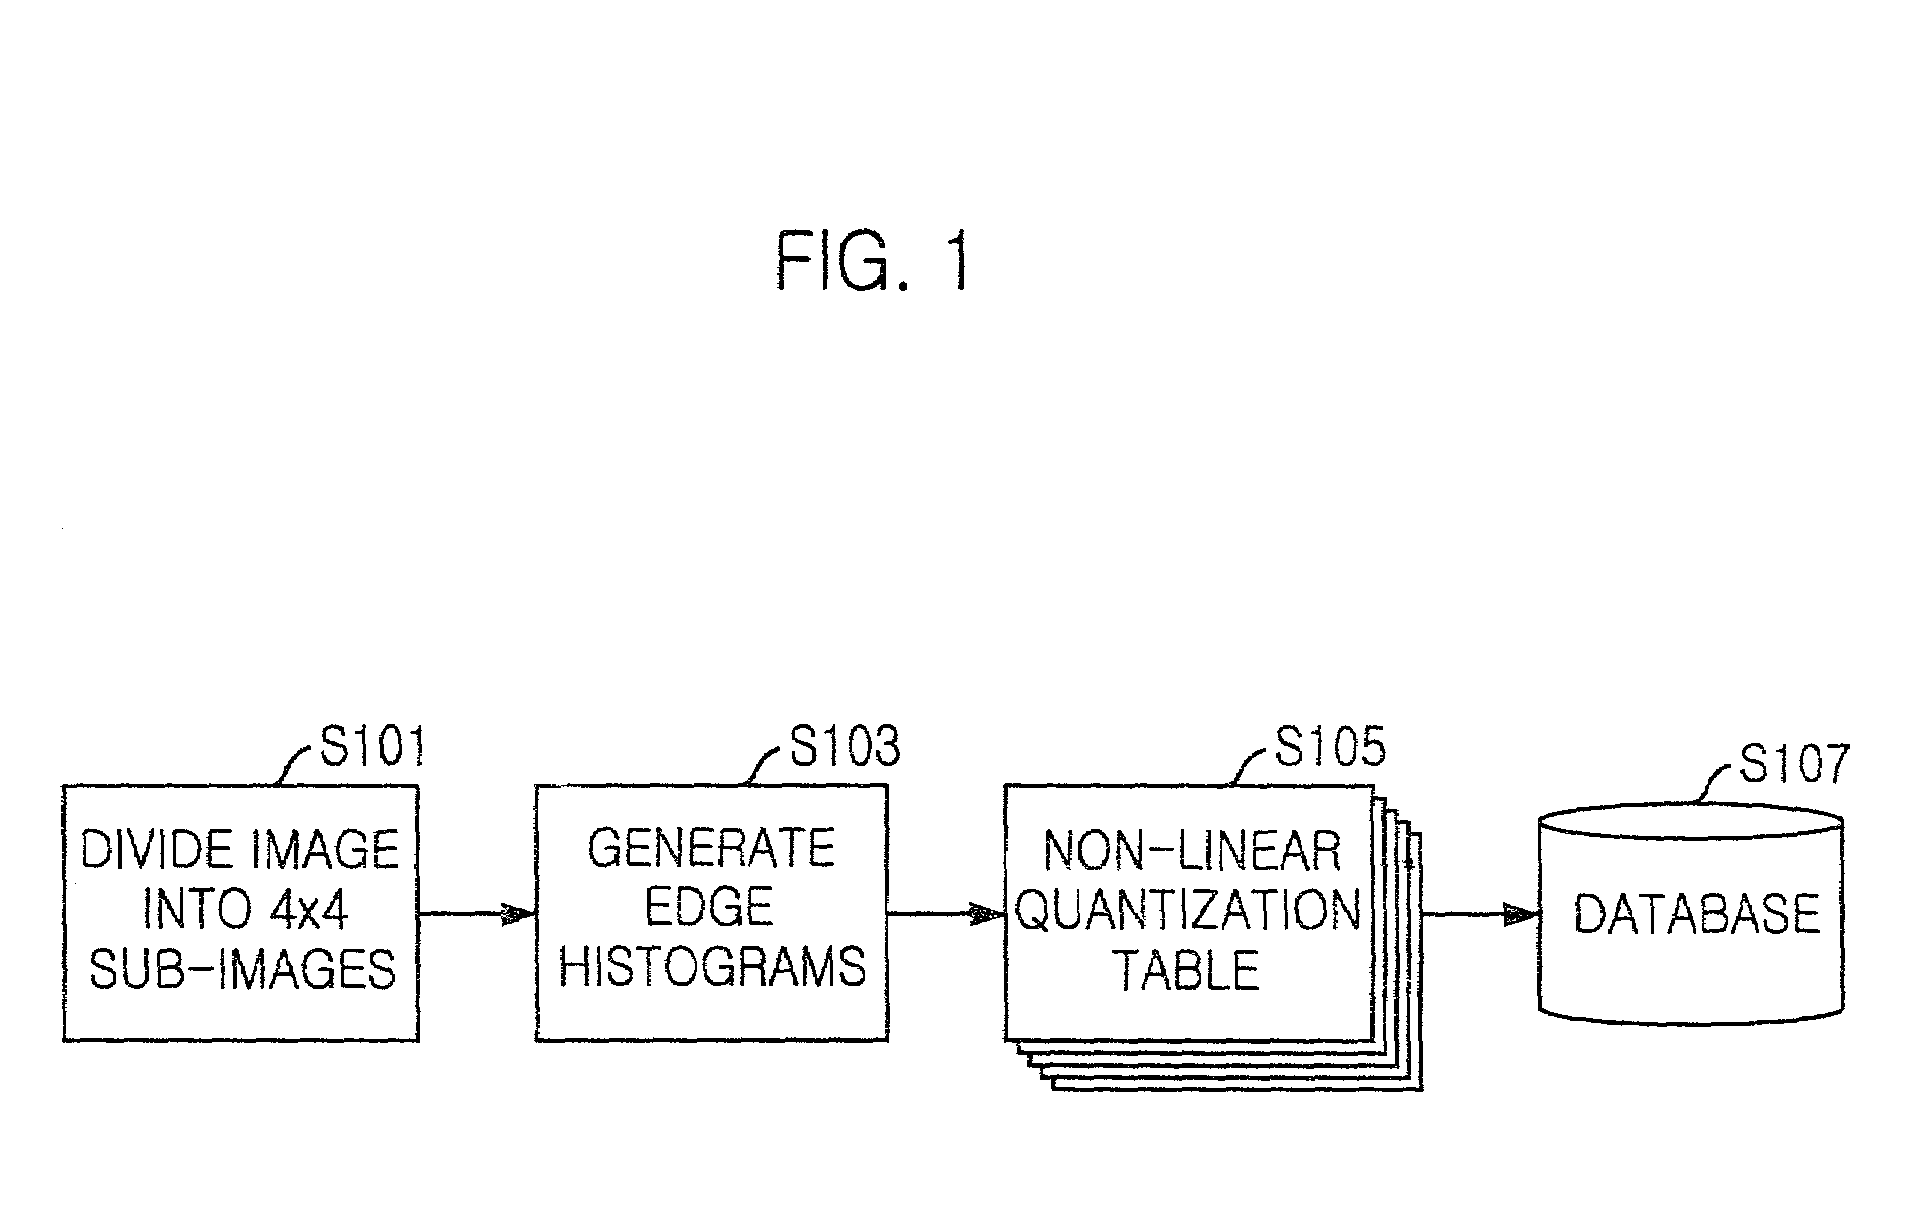 Non-linear quantization and similarity matching methods for retrieving image data